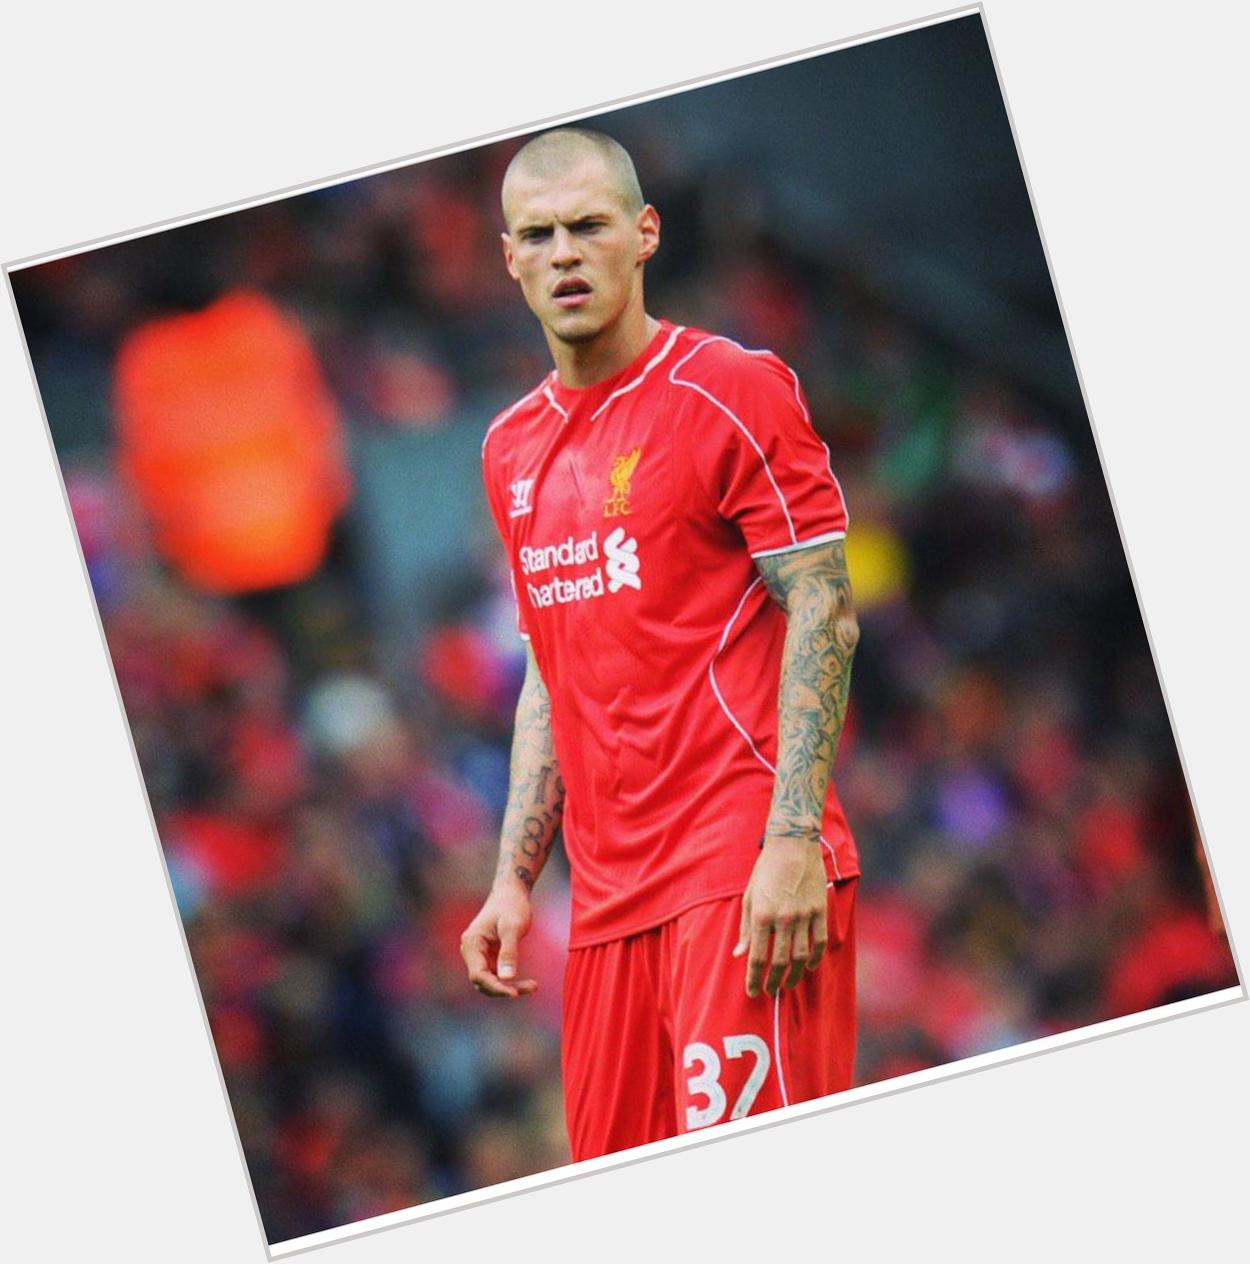 And happy birthday to Martin Skrtel. Turns 30 today. Not an ideal age for being a soft lad.  